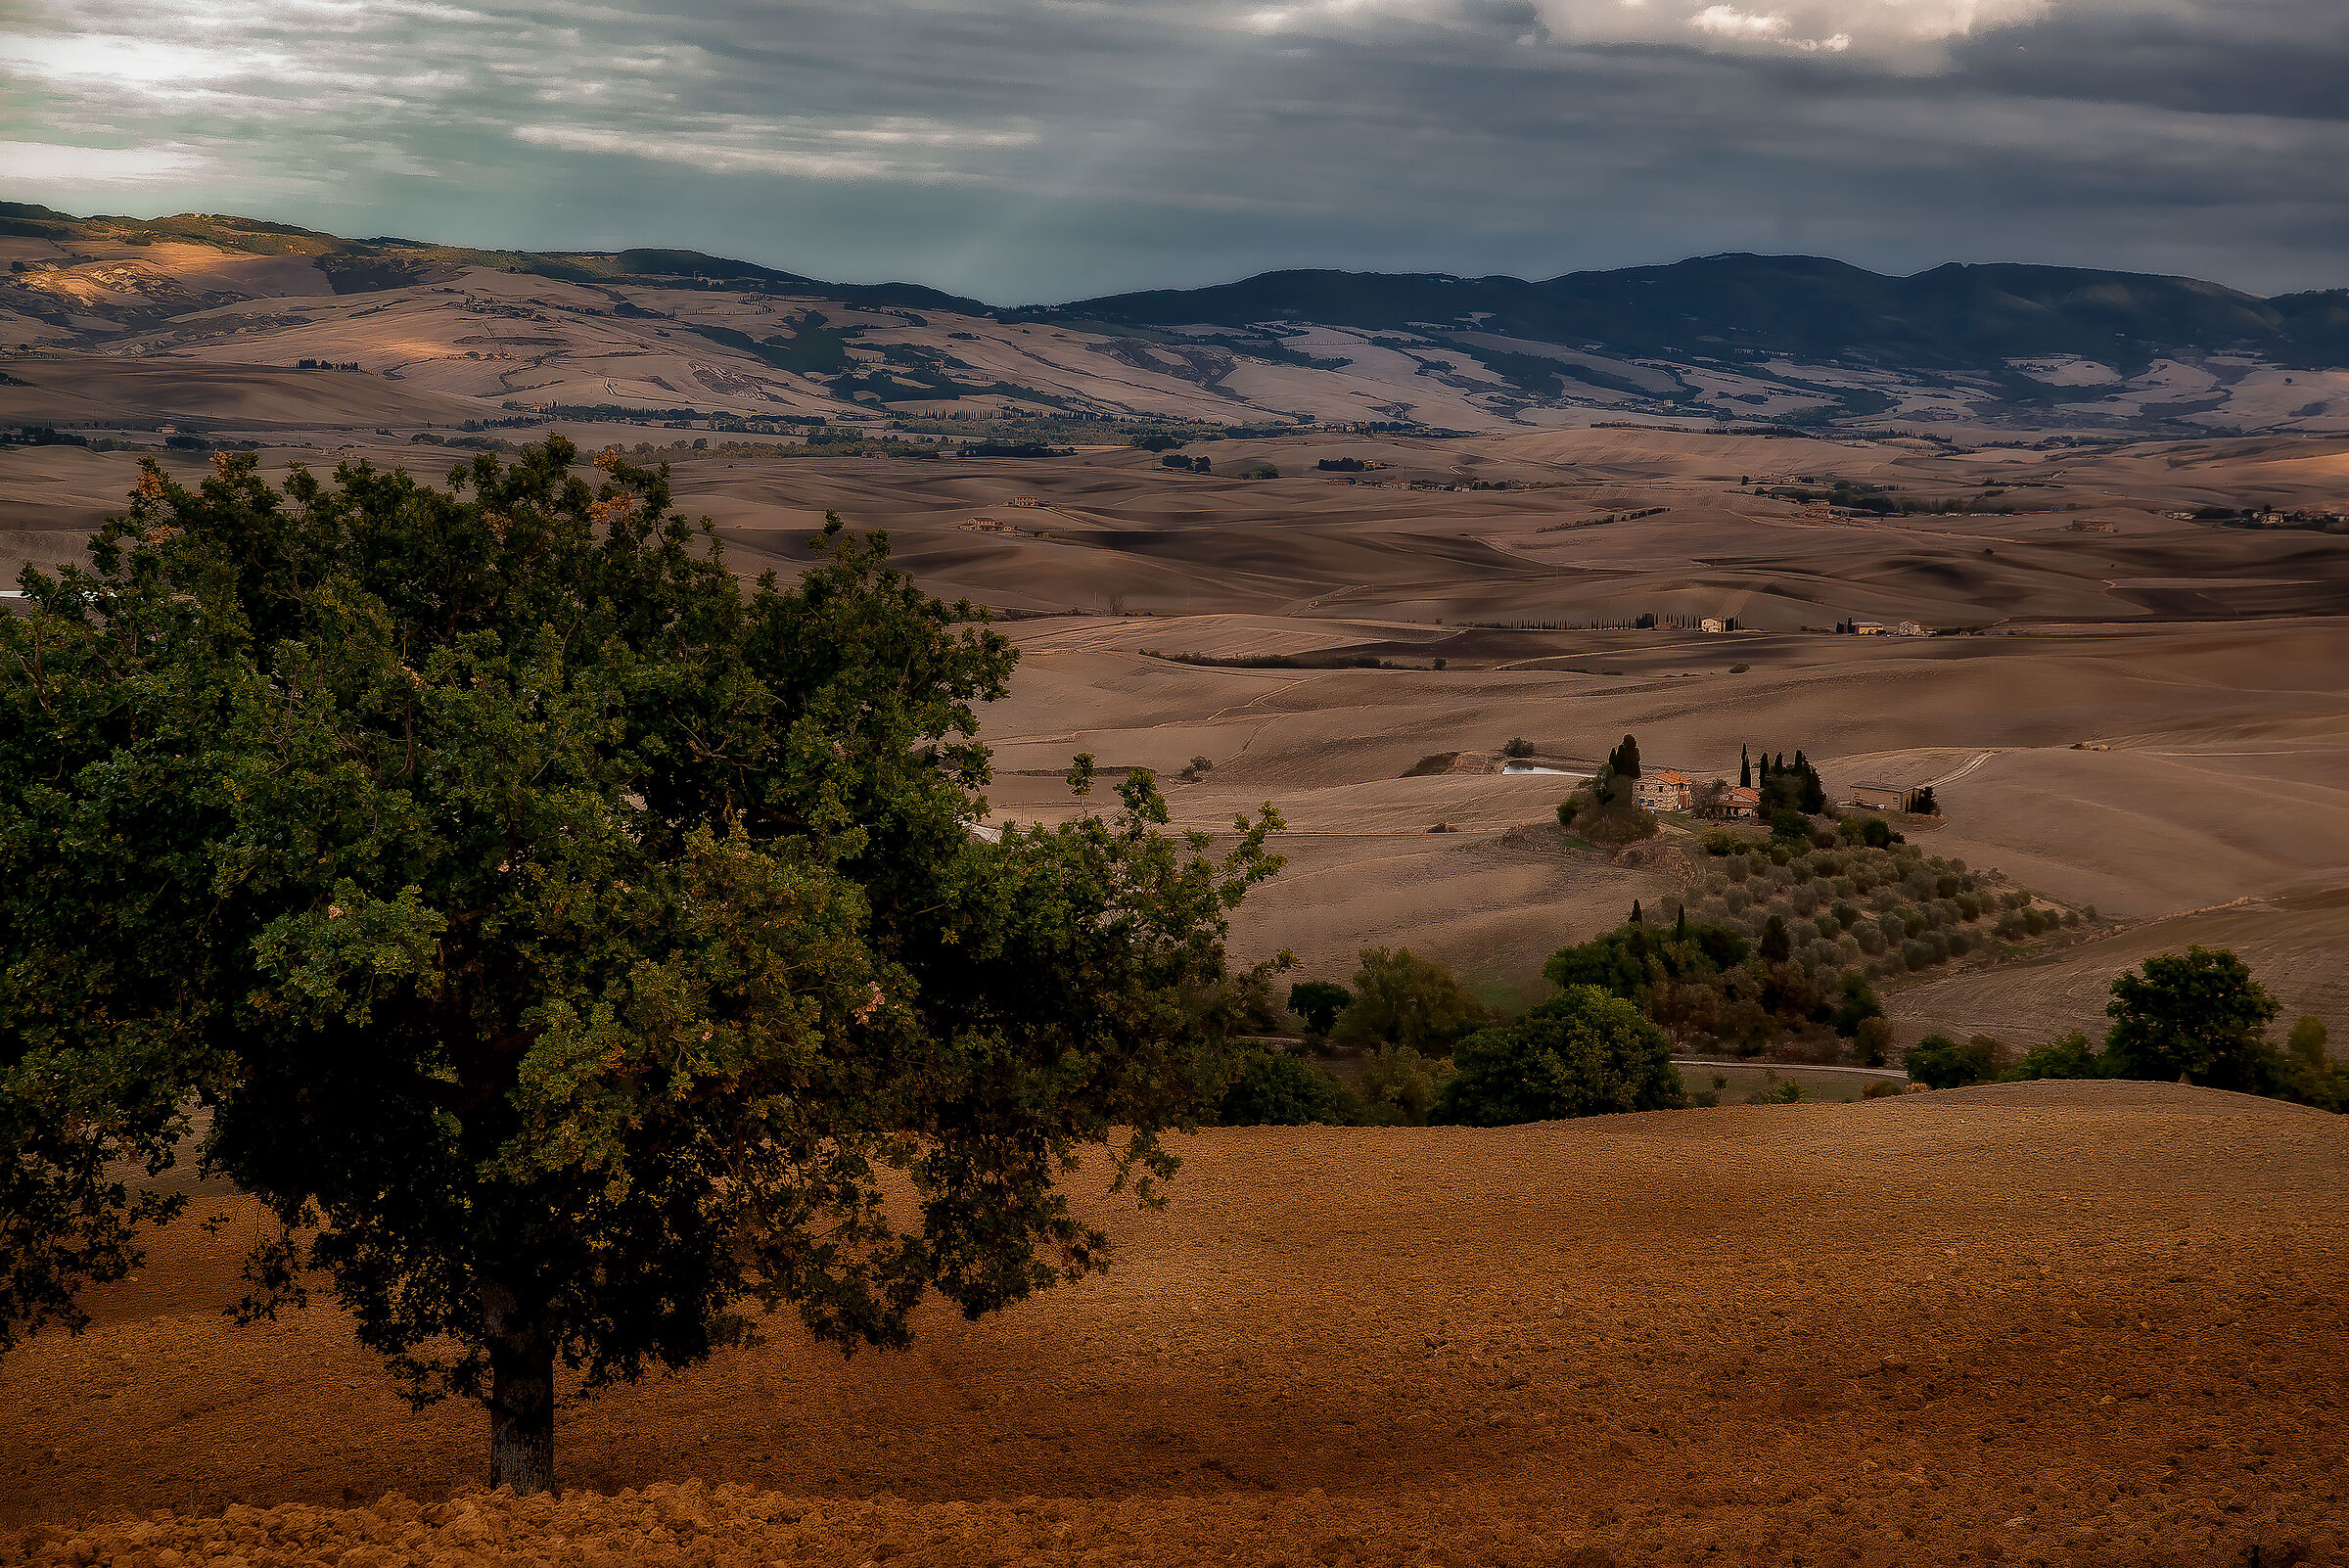 val d'orcia, ready for sowing...